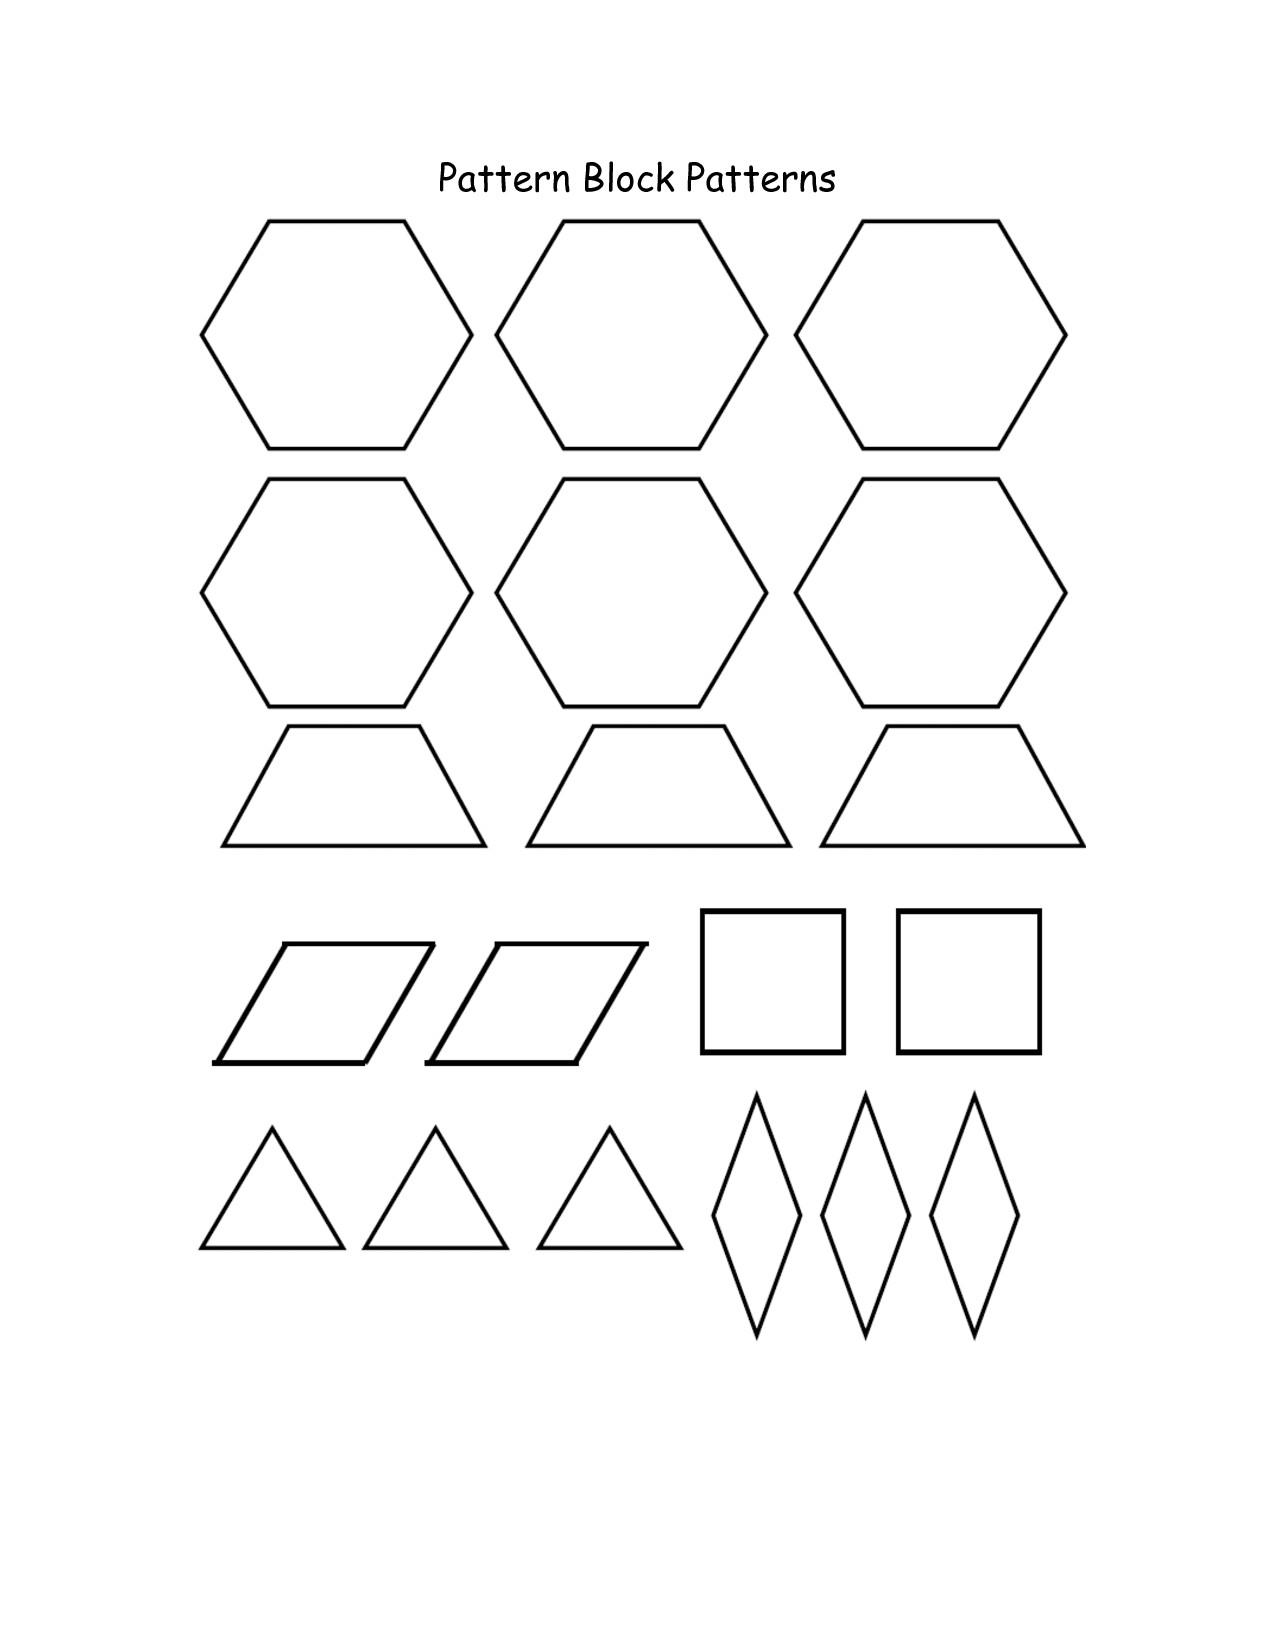 Pattern Block Worksheets The Best Worksheets Image Collection